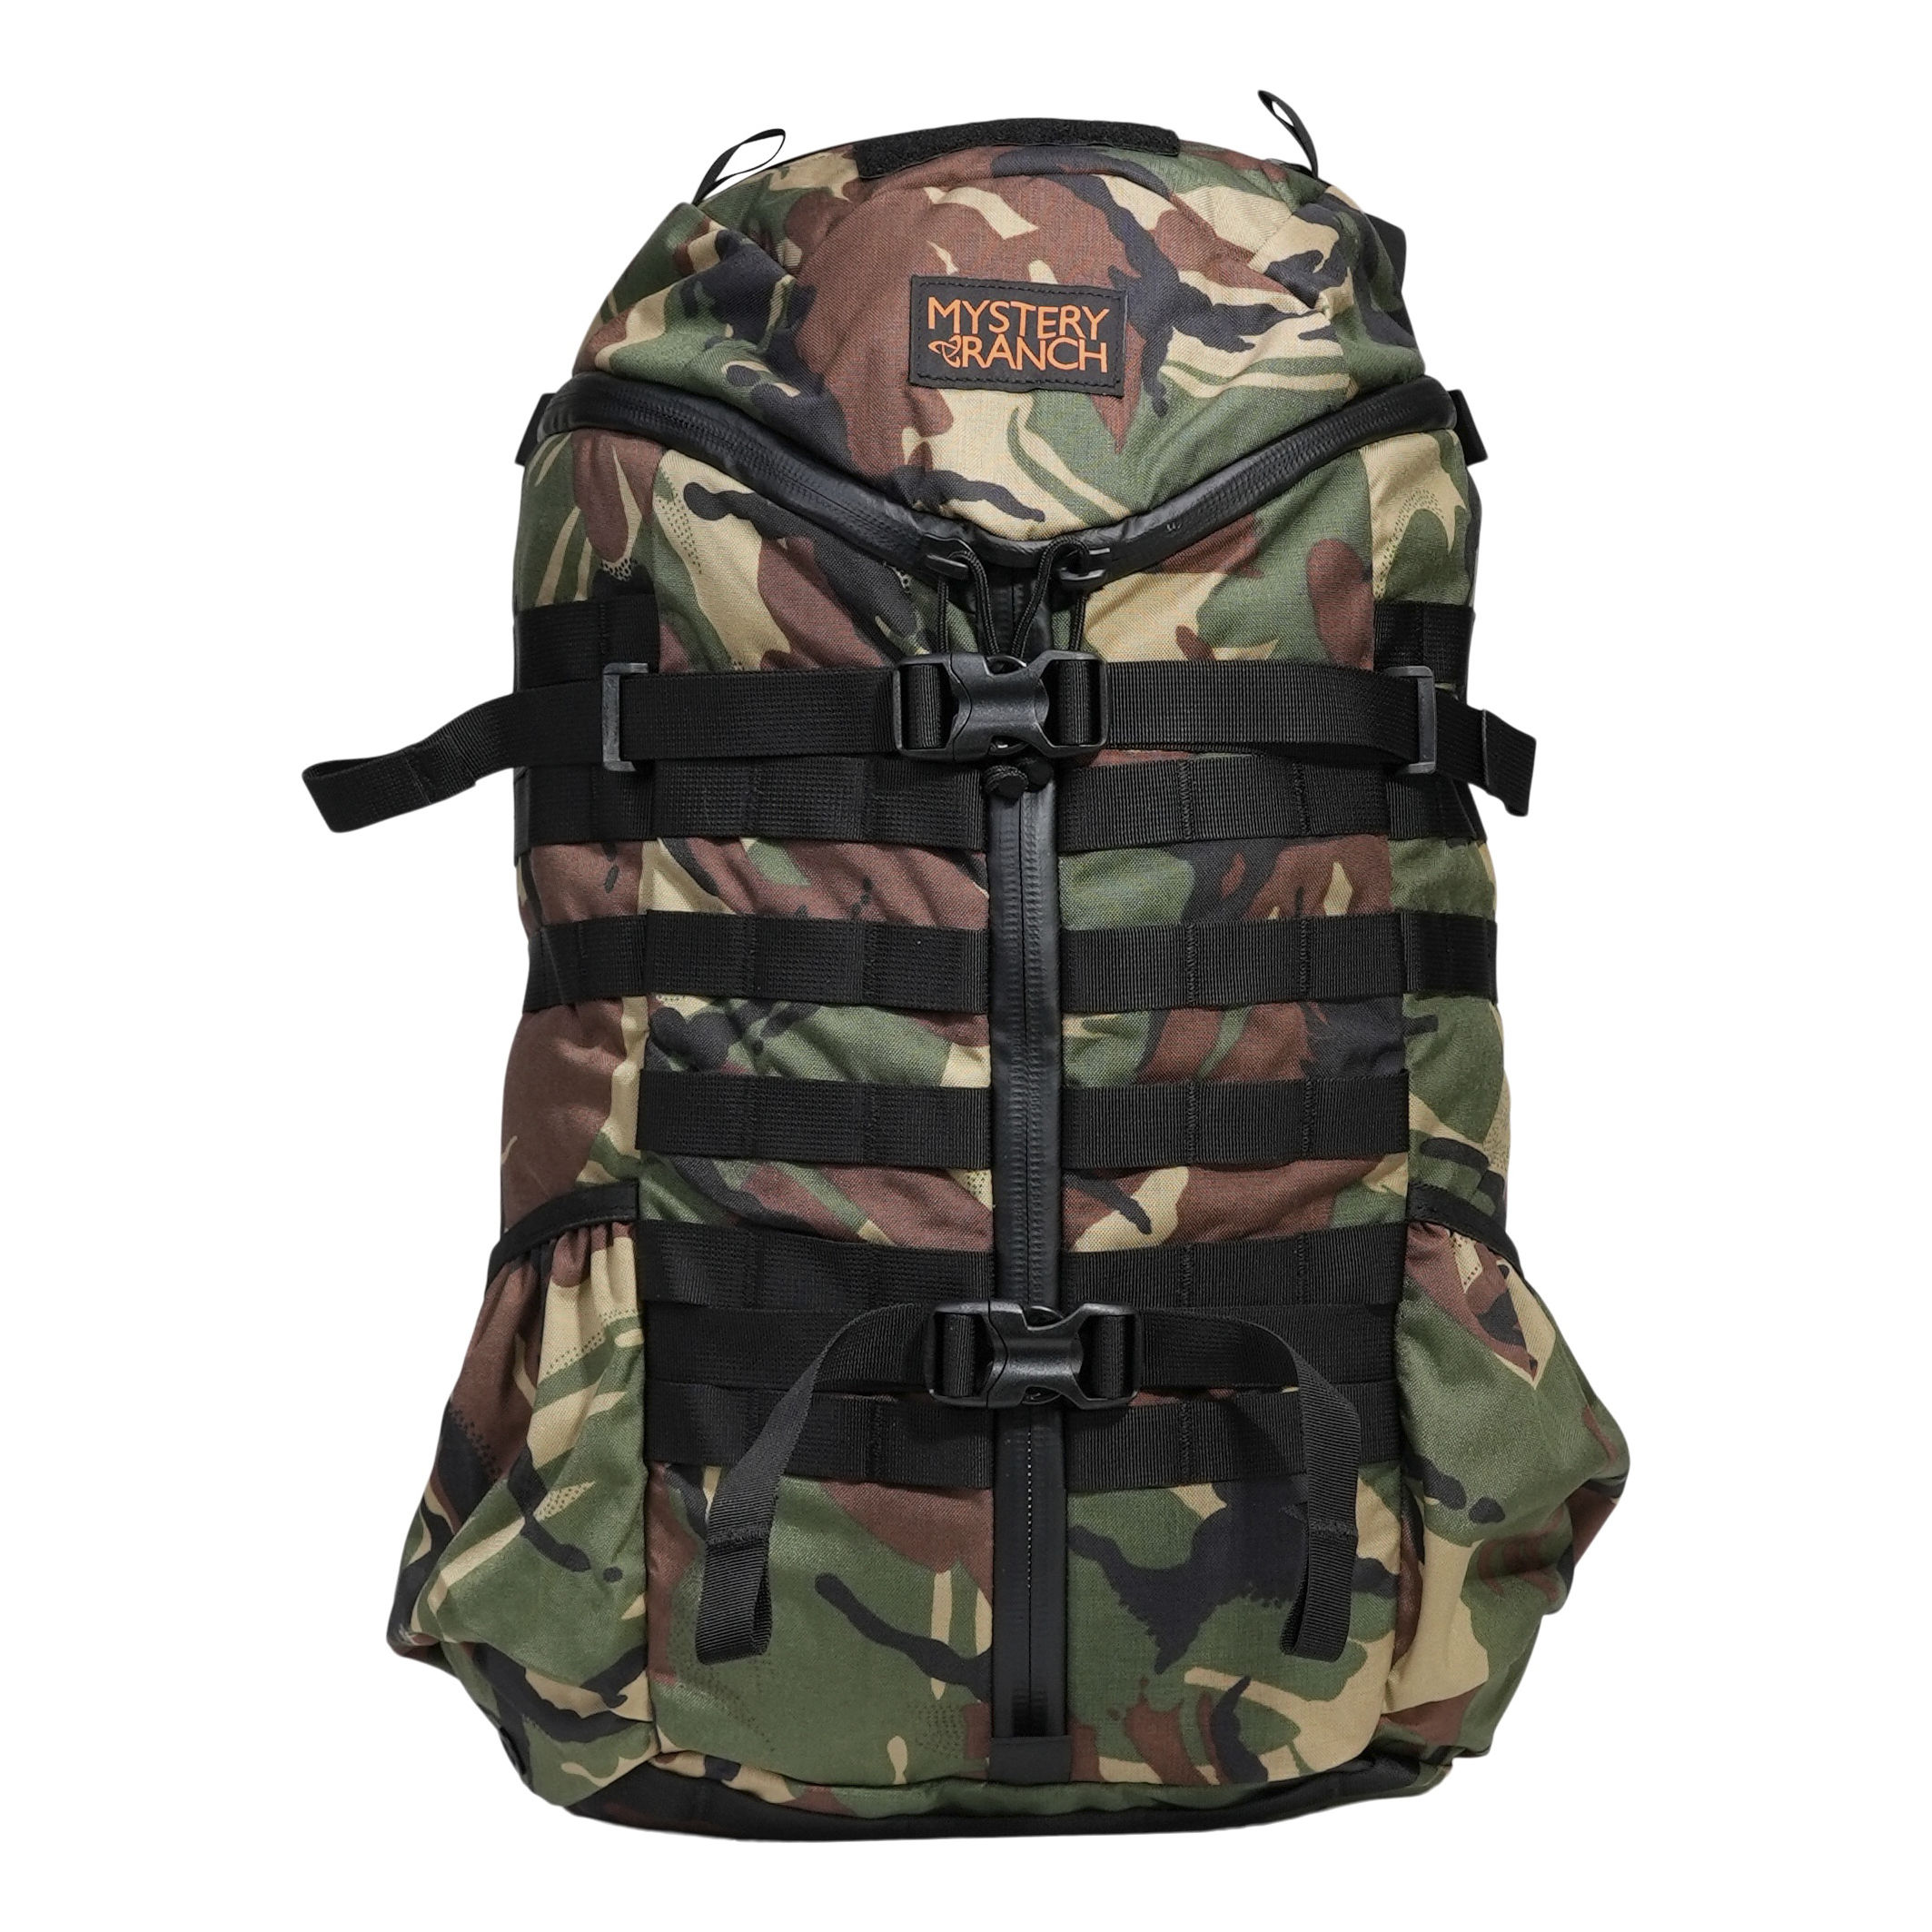 Mystery Ranch 2-Day Assault Tactical Backpack - 30L - DPM Camo 